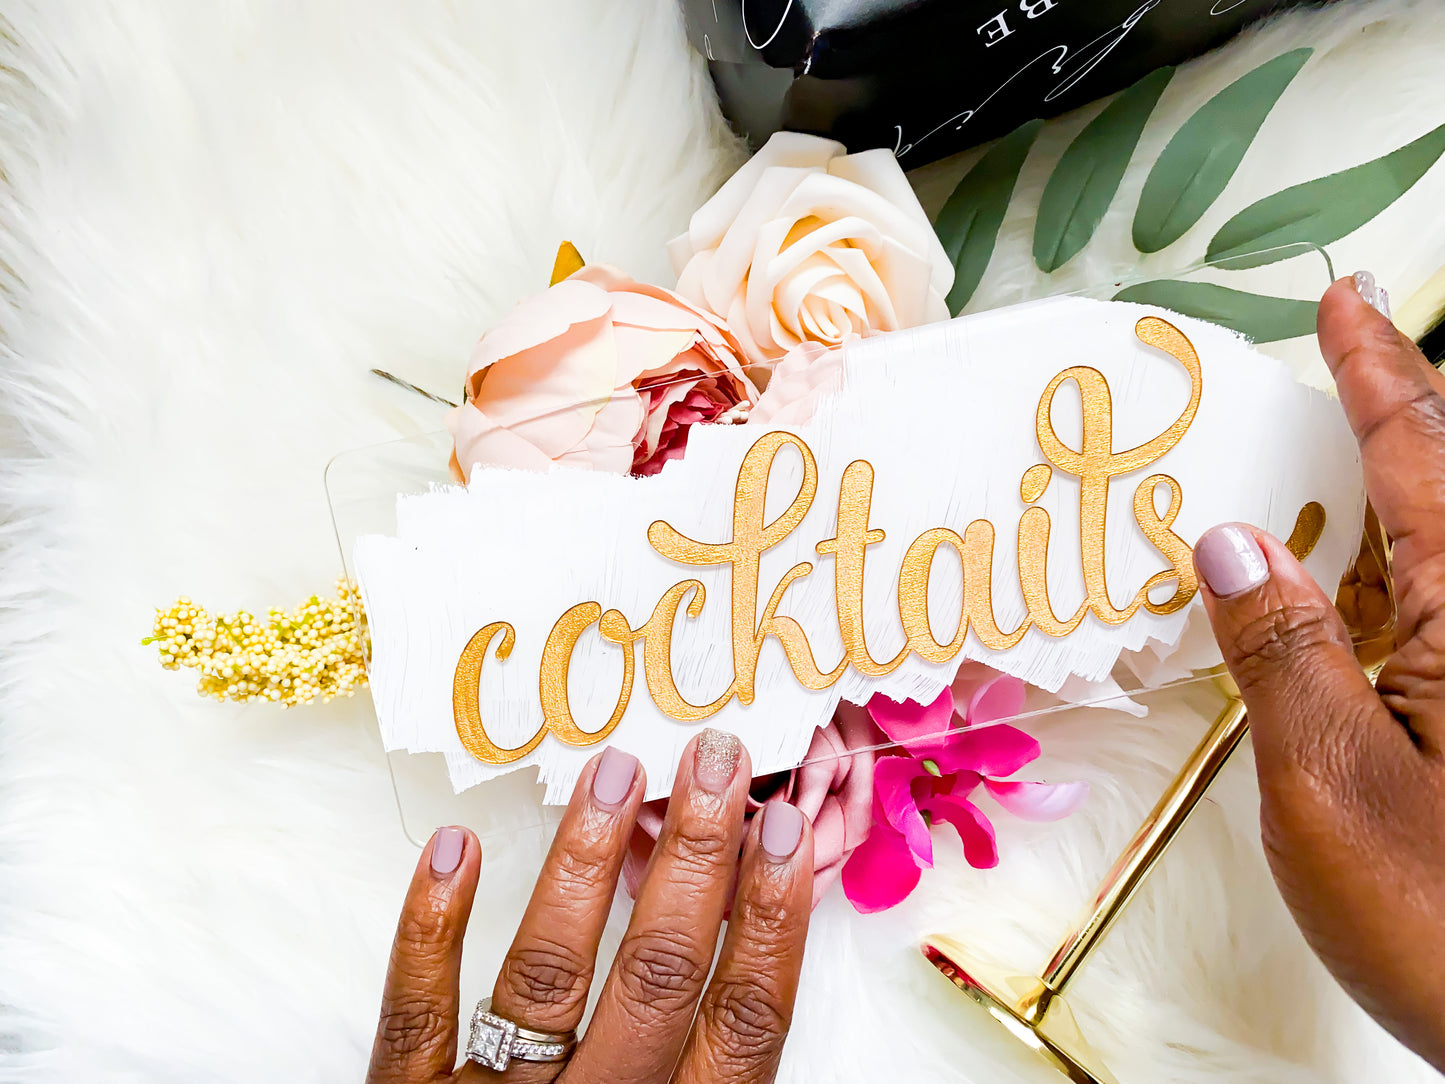 Clear Acrylic Cocktails Sign